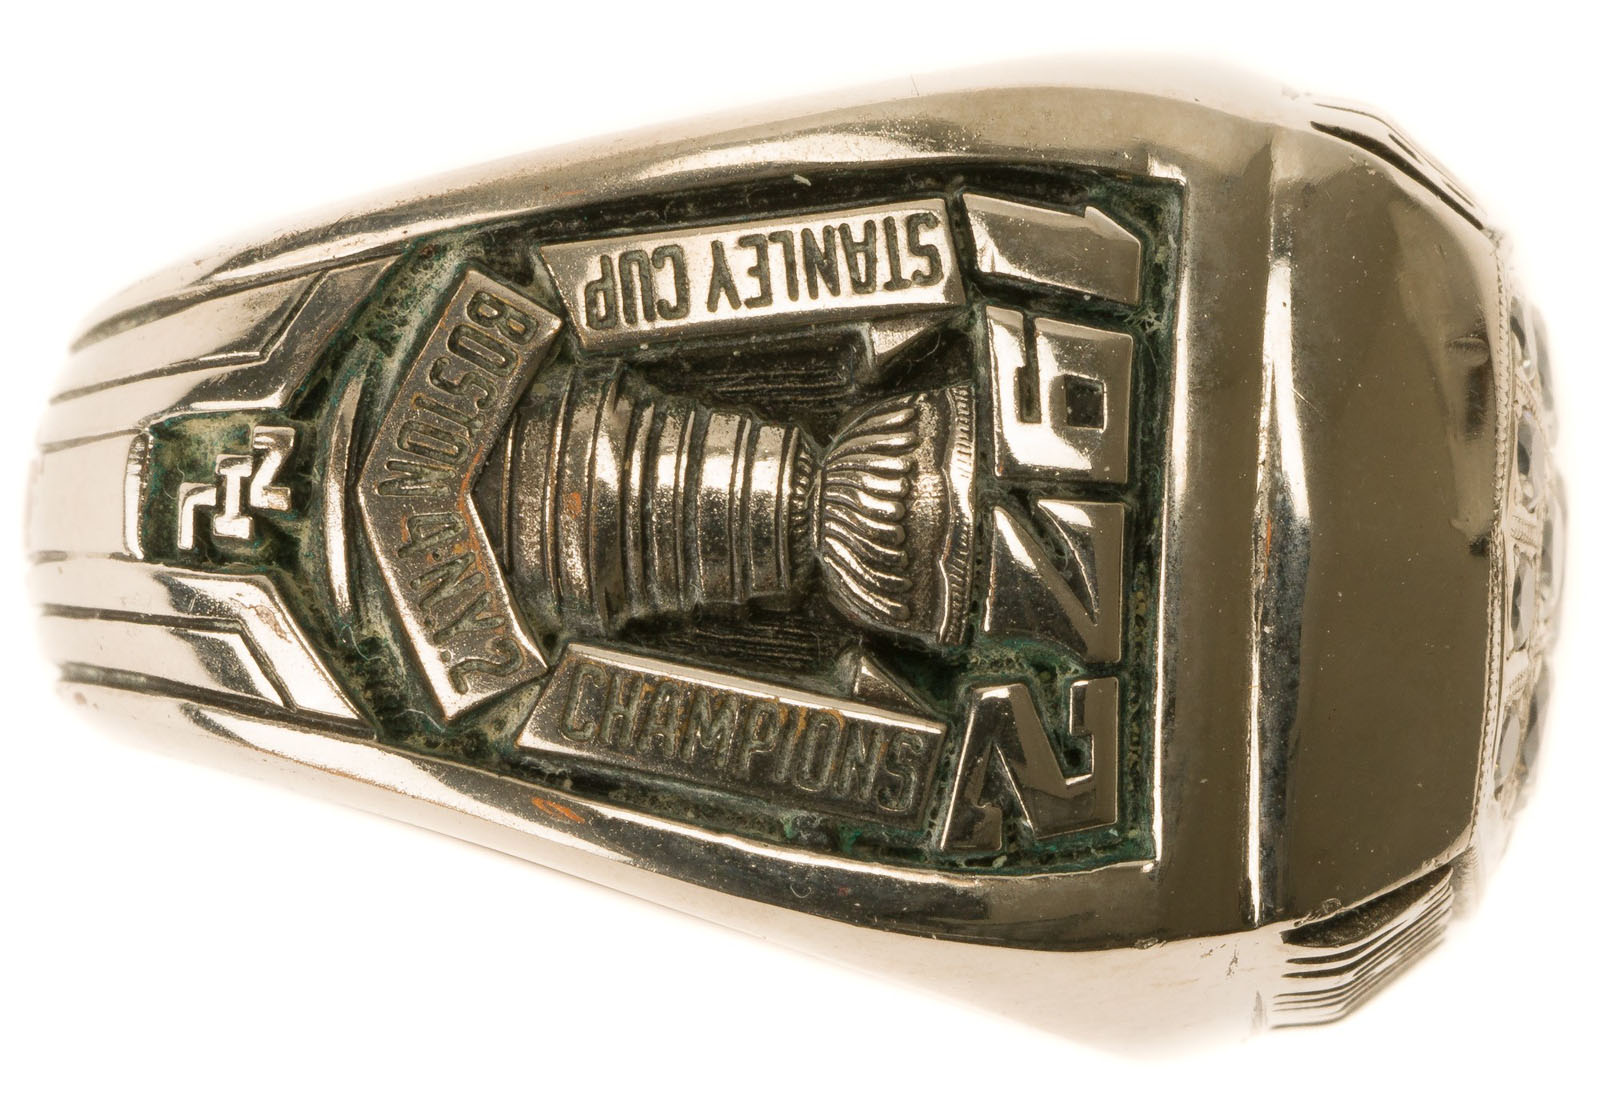 https://rea-archive.us-east-1.linodeobjects.com/2019/summer/2478-1972-bobby-orr-boston-bruins-stanley-cup-championship-replica-ring-3.jpg